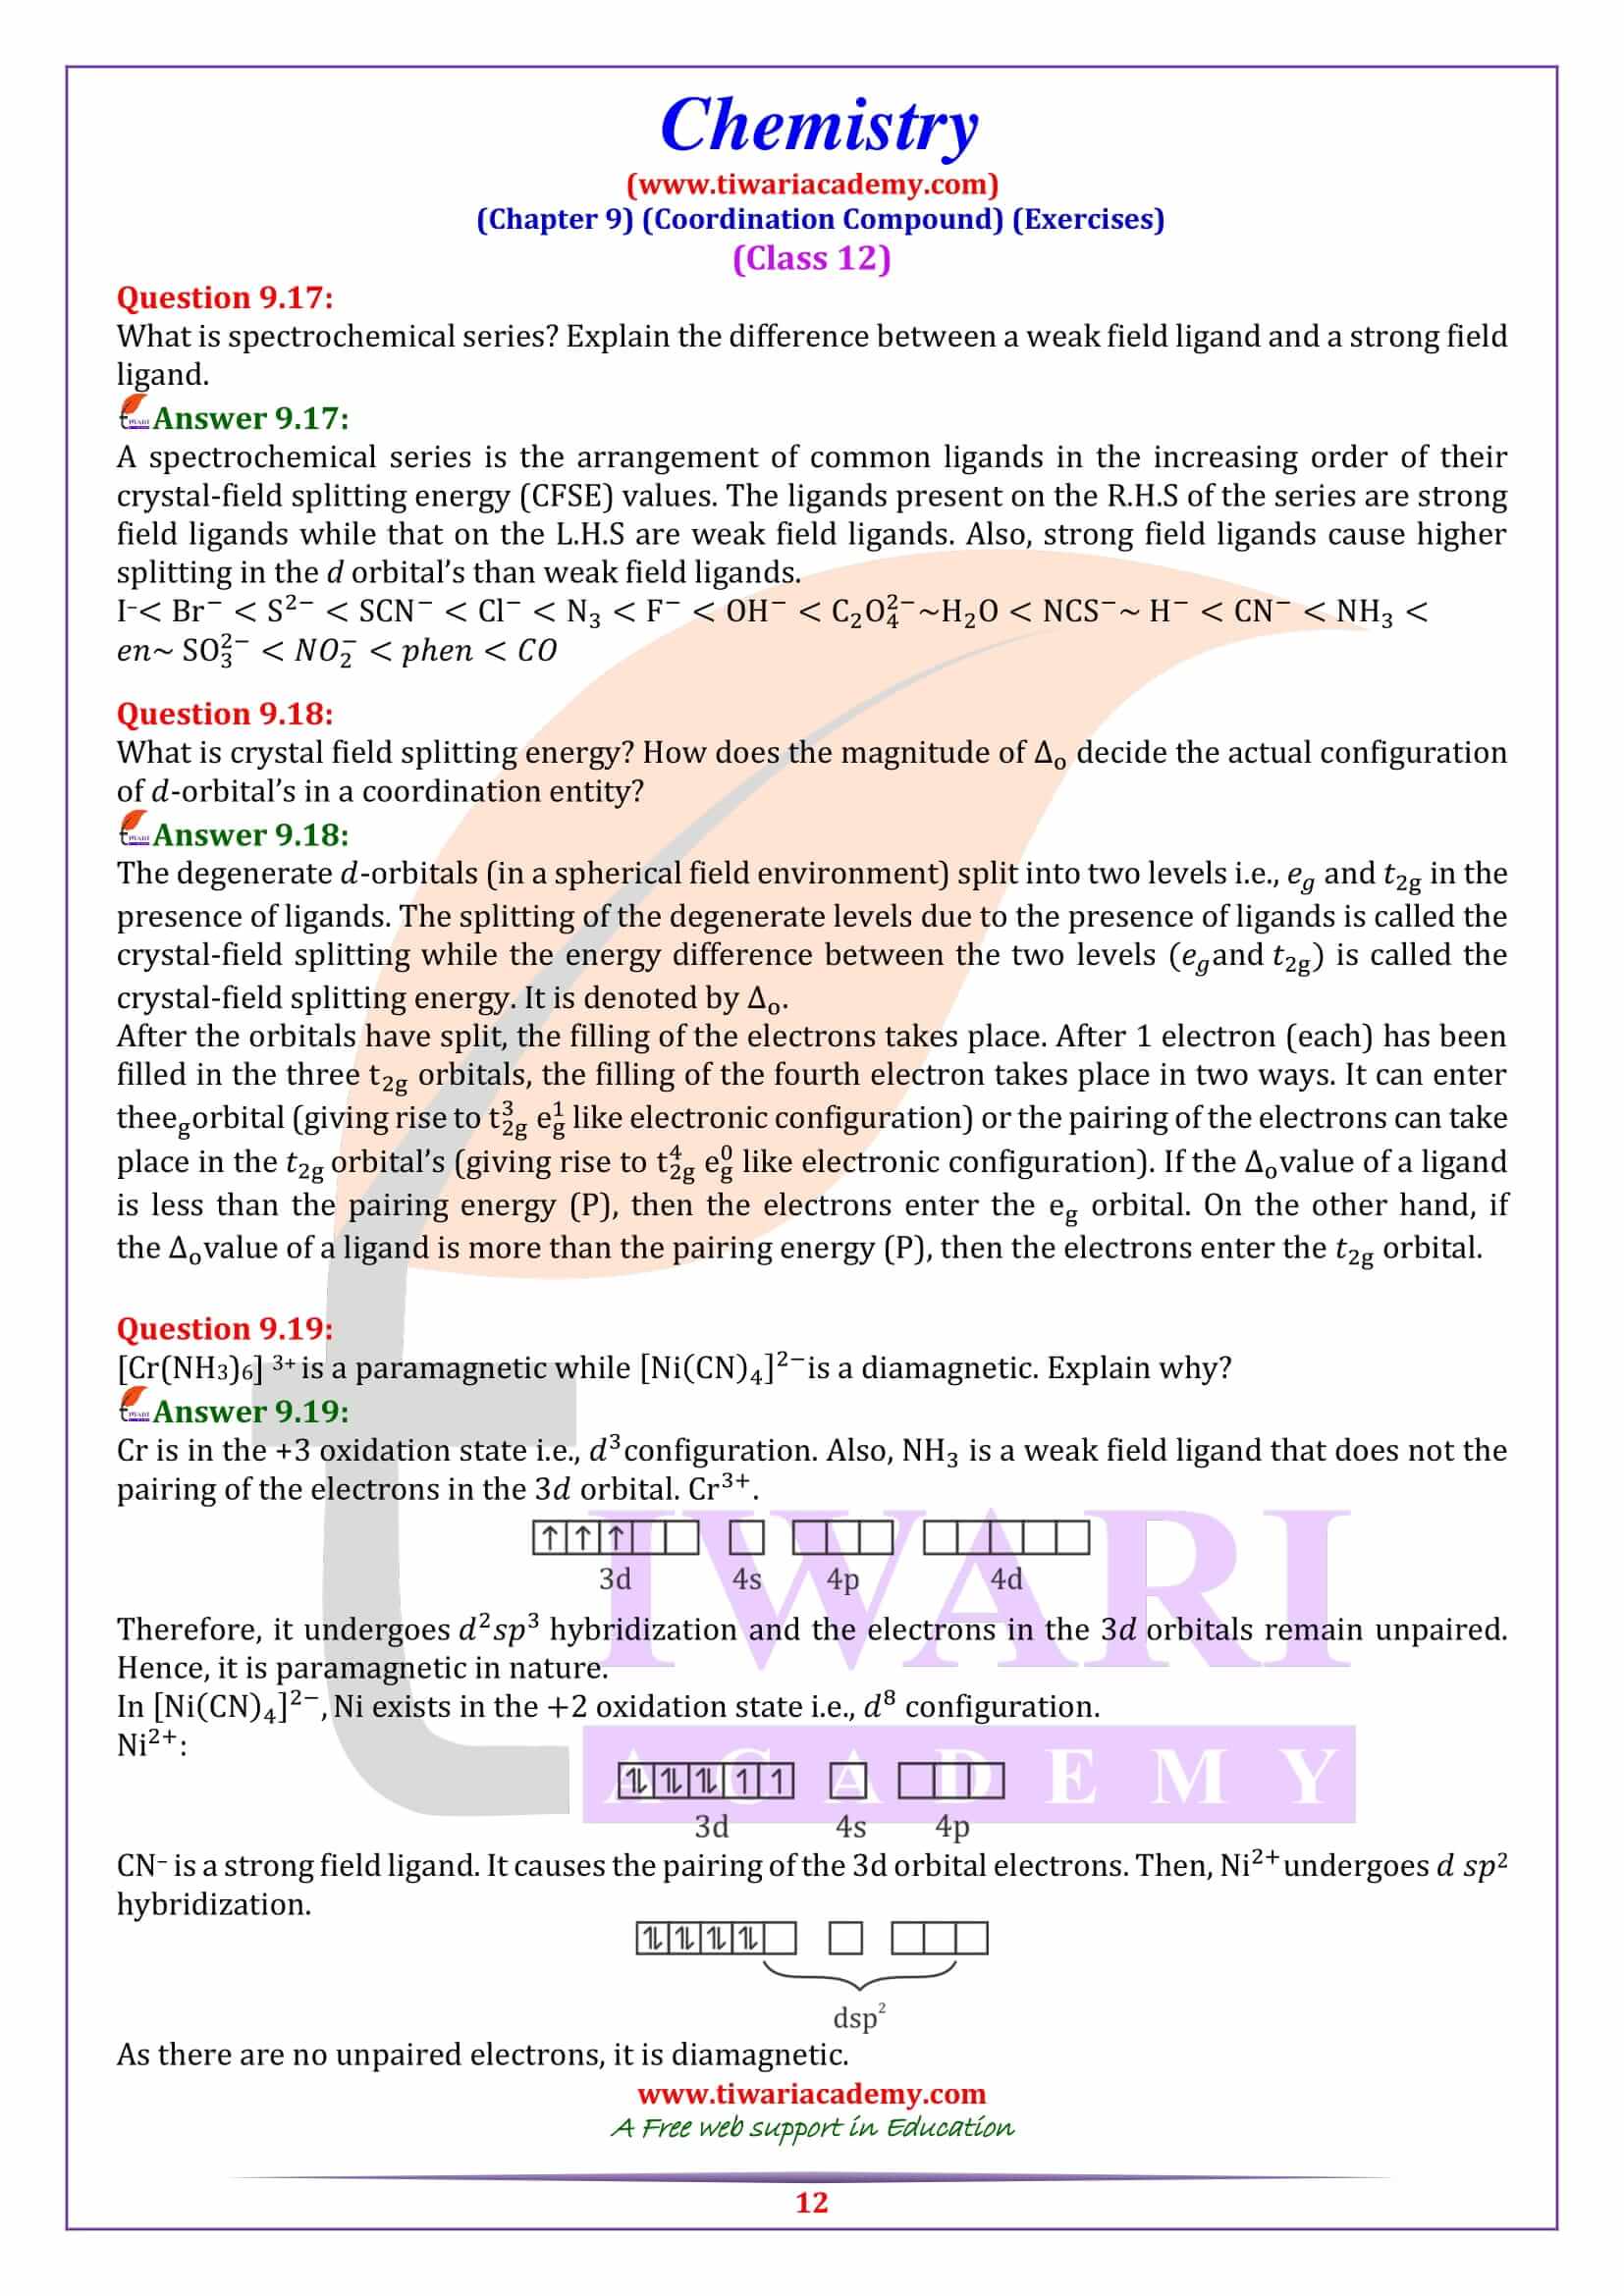 NCERT Solutions for Class 12 Chemistry Chapter 9 with extra questions